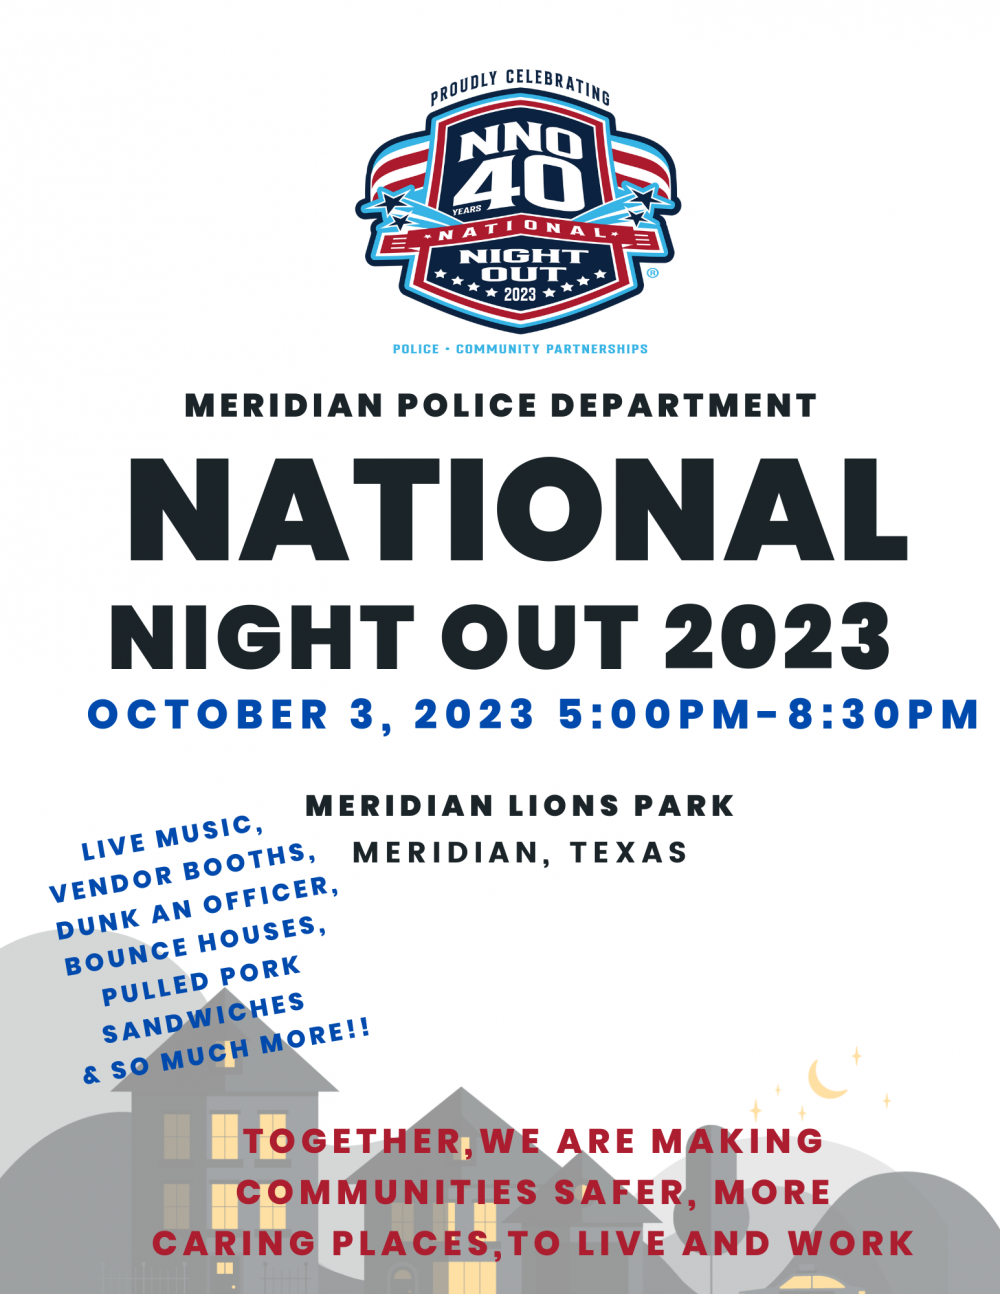 National Night Out 2023 Meridian Texas